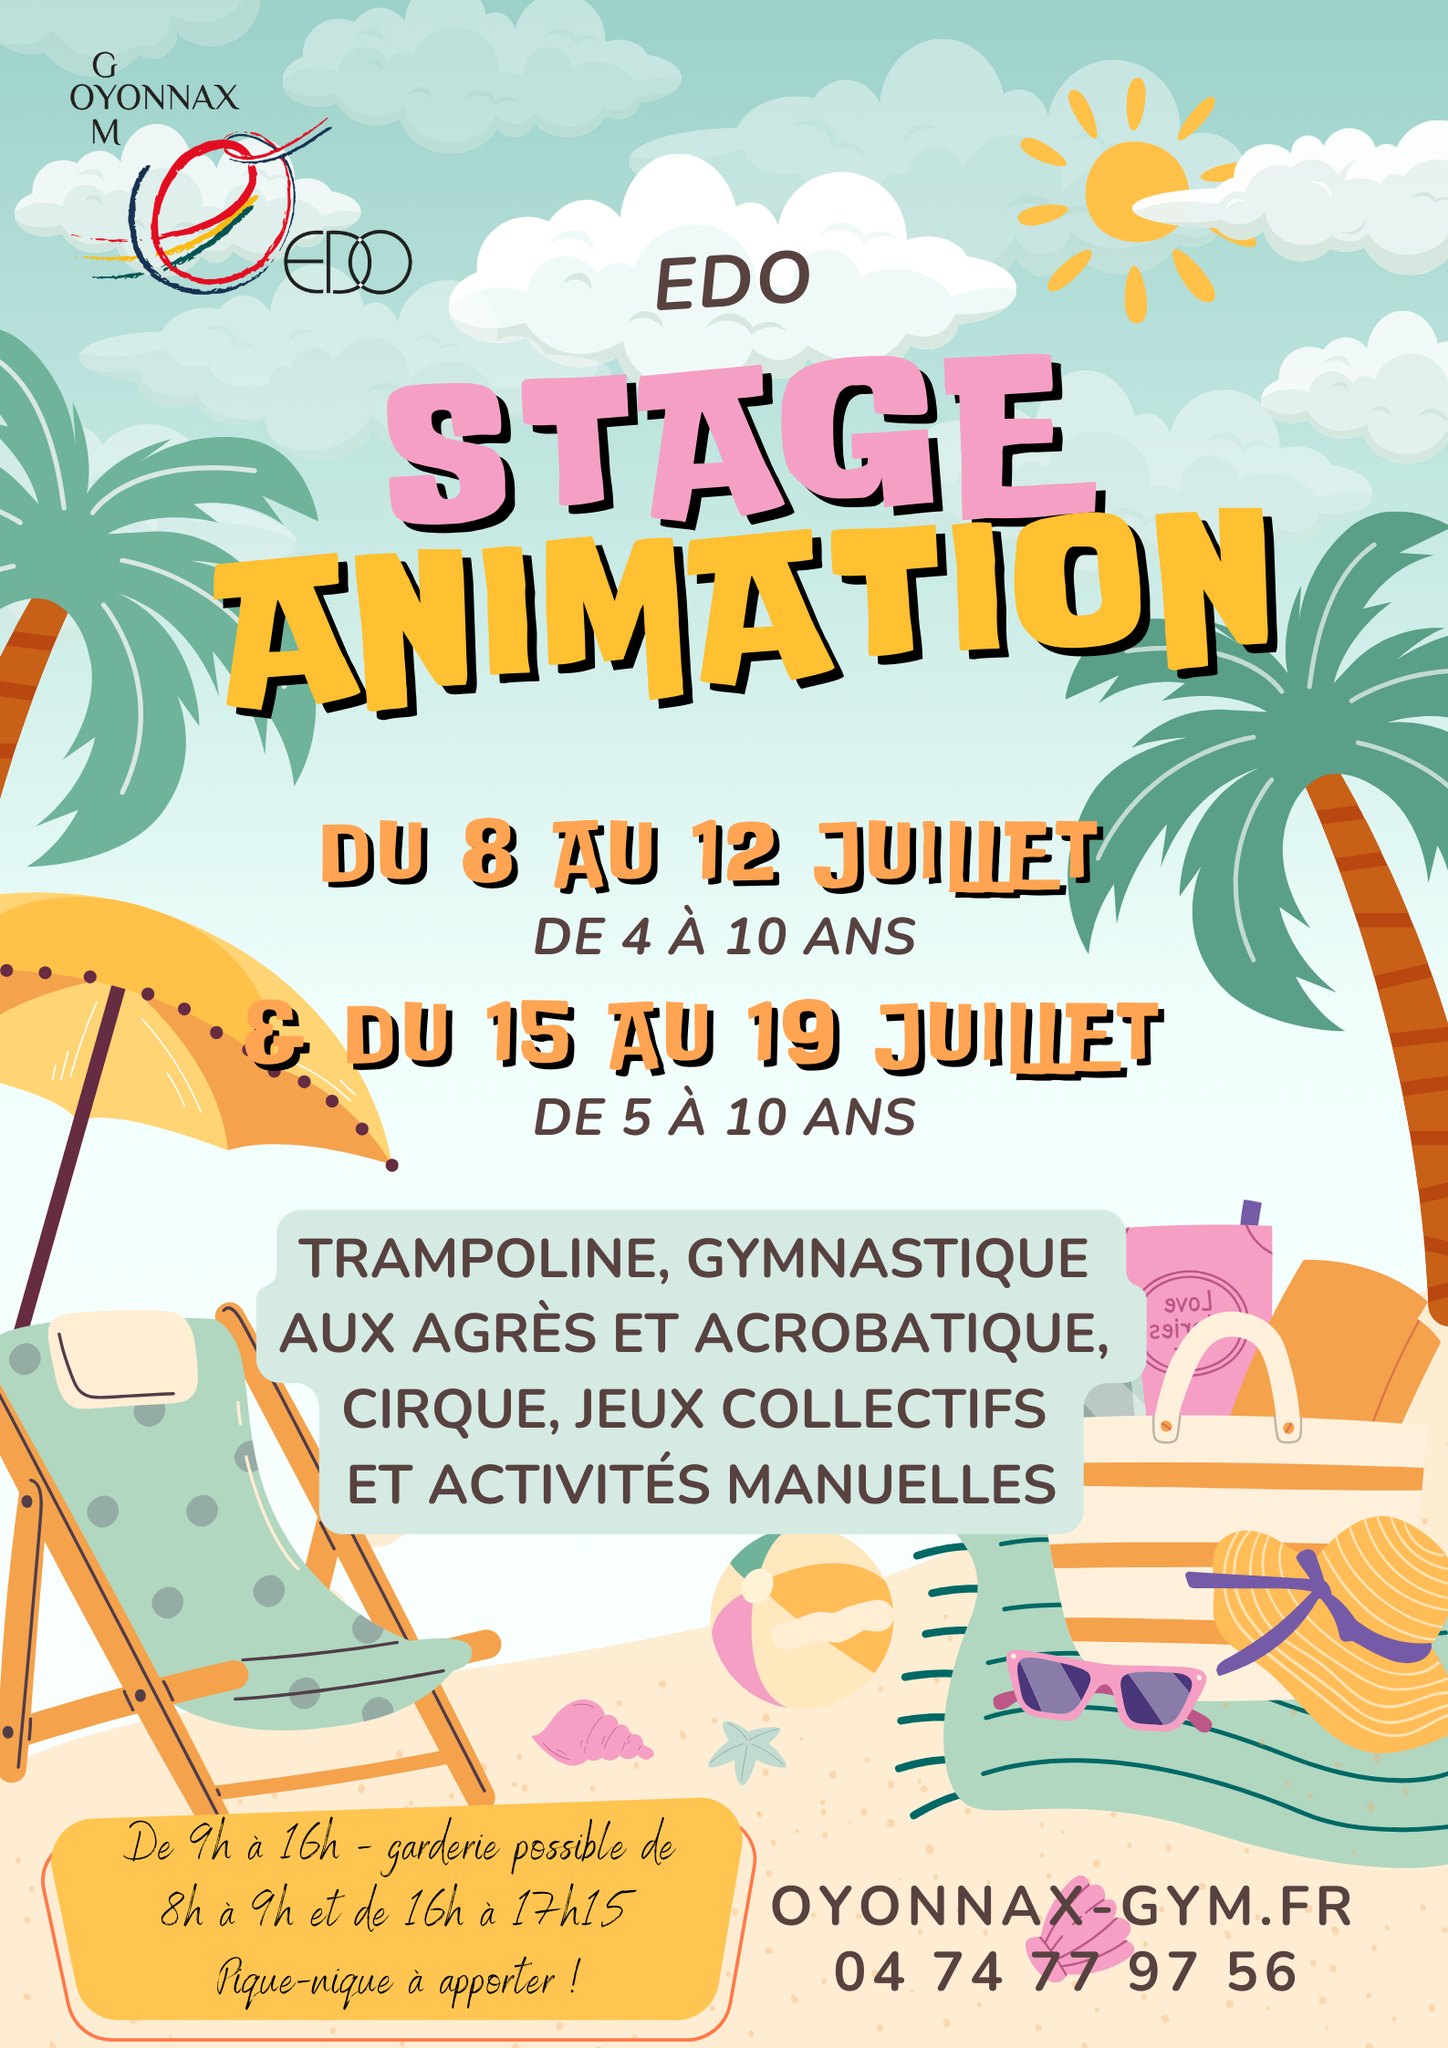 VACANCES SPORTIVES - stage animation